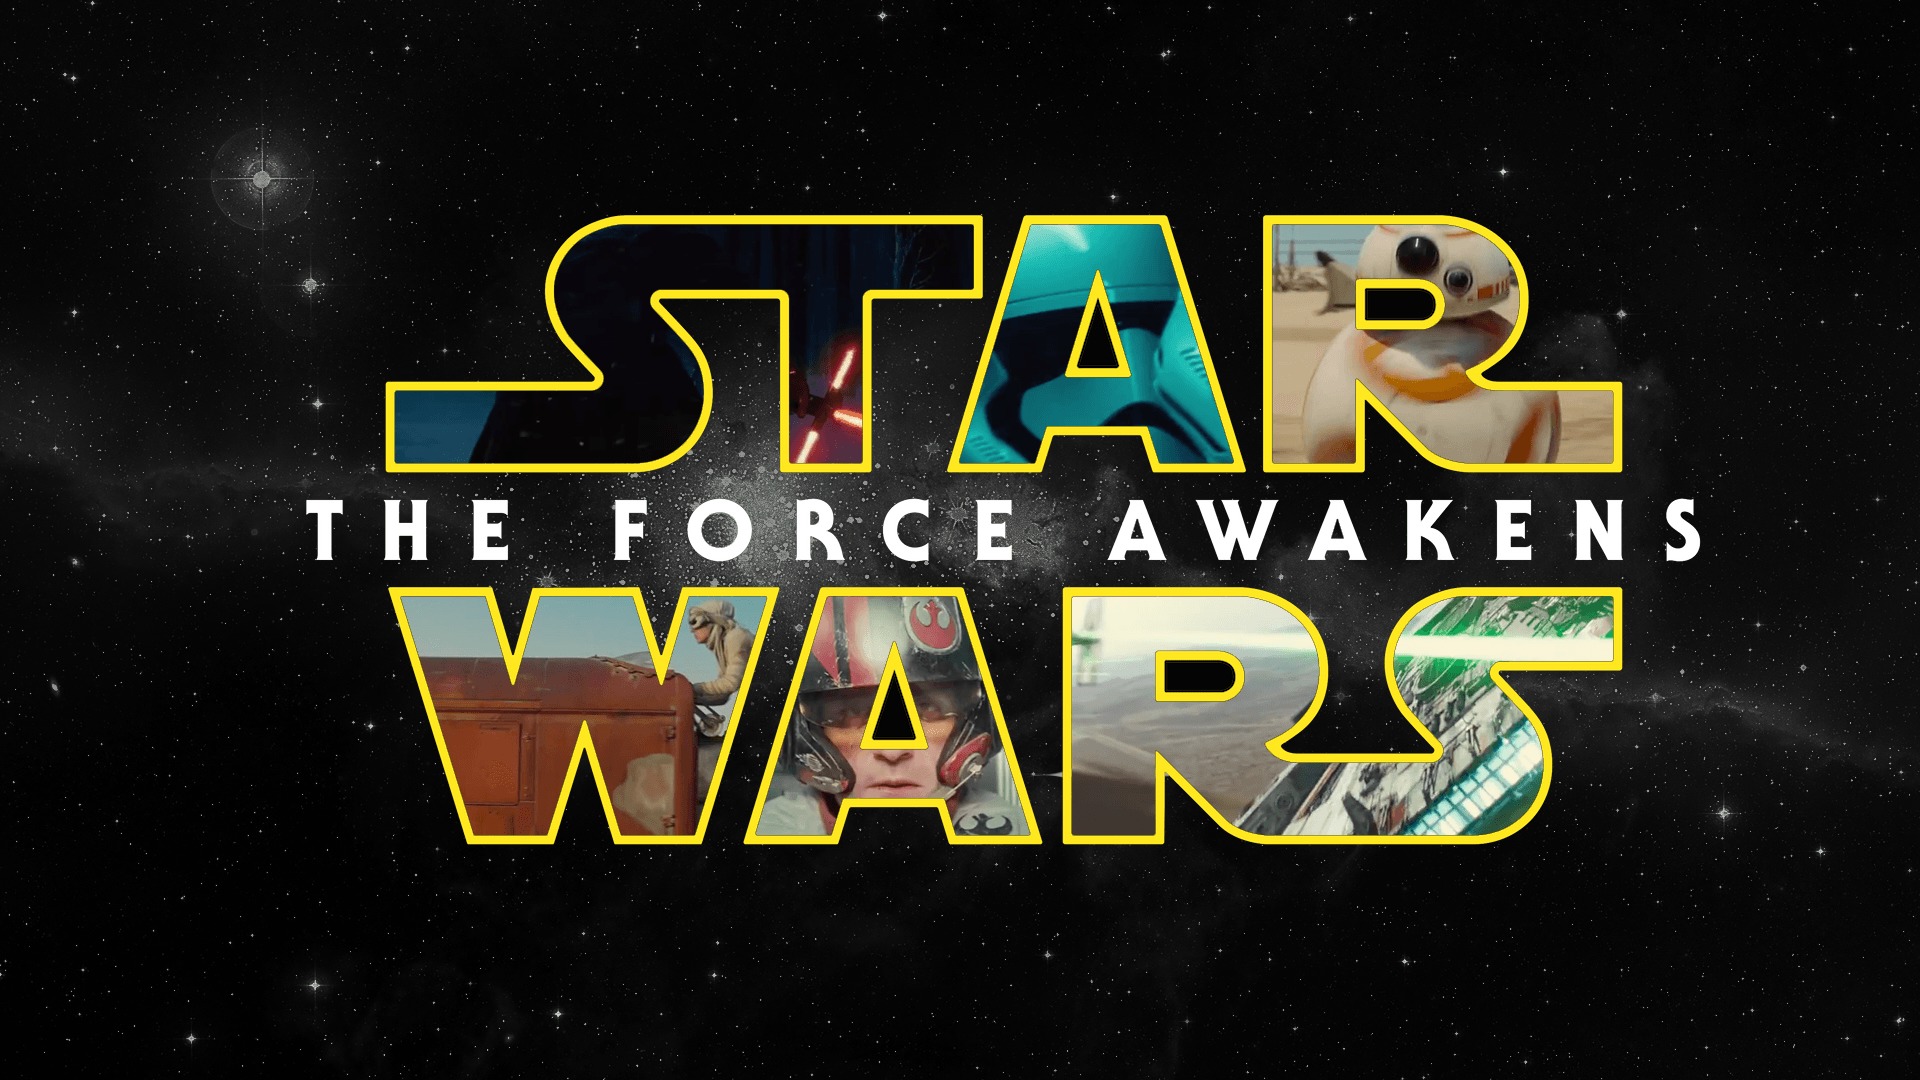 [Star Wars: The Force Awakens Review] Force Is Just Waking Up